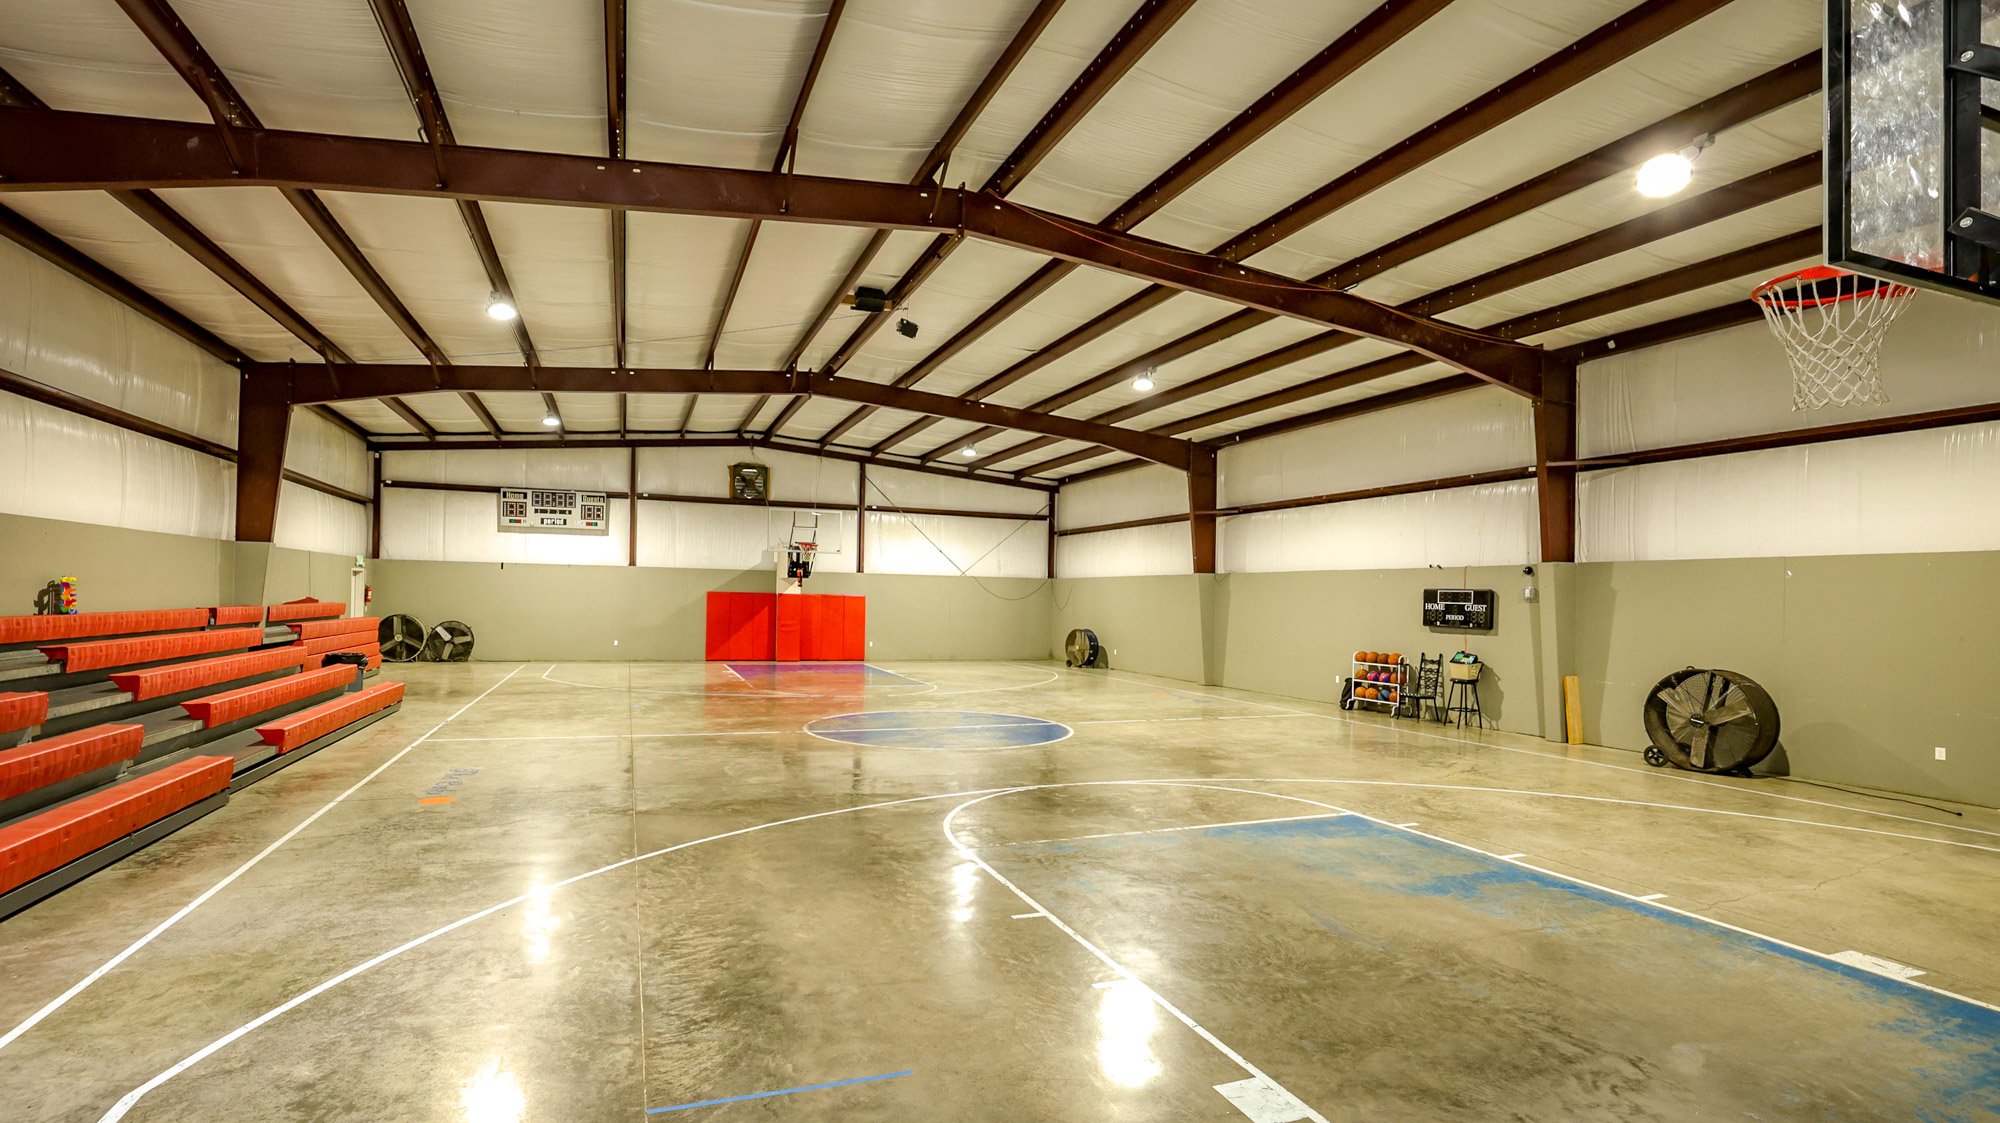 Building a Basketball Gym: What's the Cost?